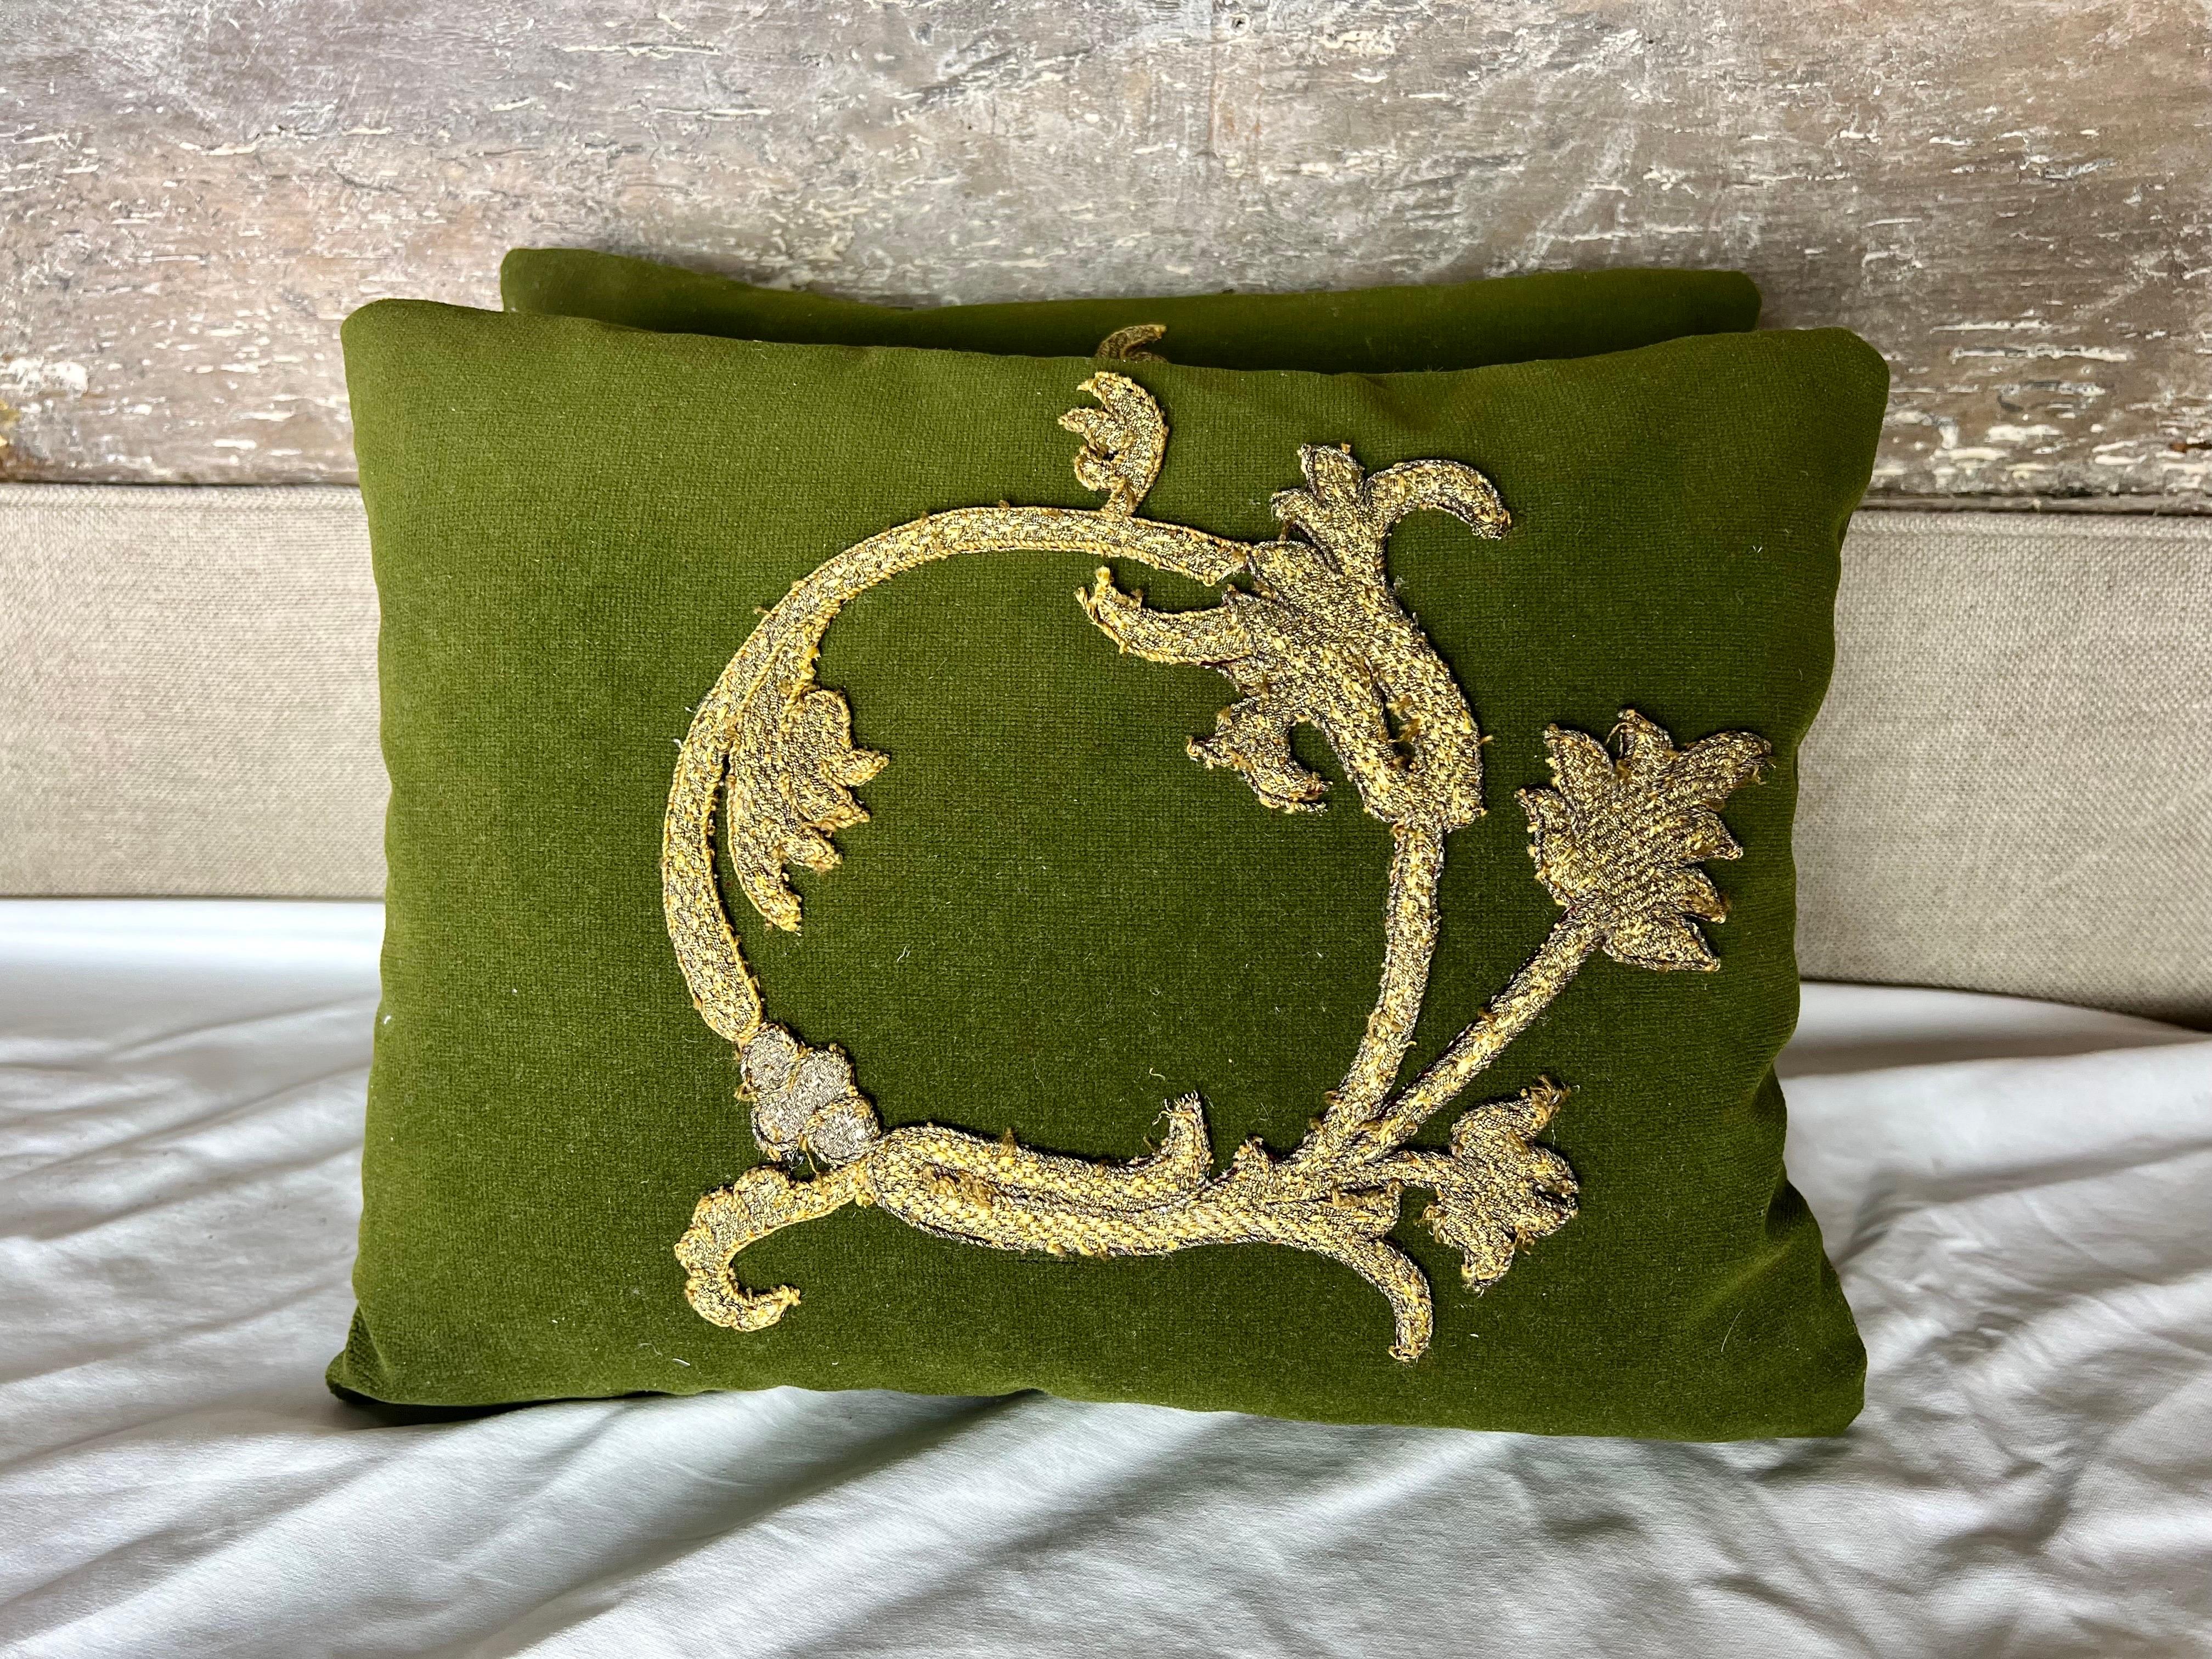 Pair of custom pillows made with 19th century metallic applique sewn on an olive green velvet backround.  Dark gray silk backs with zipper closures.